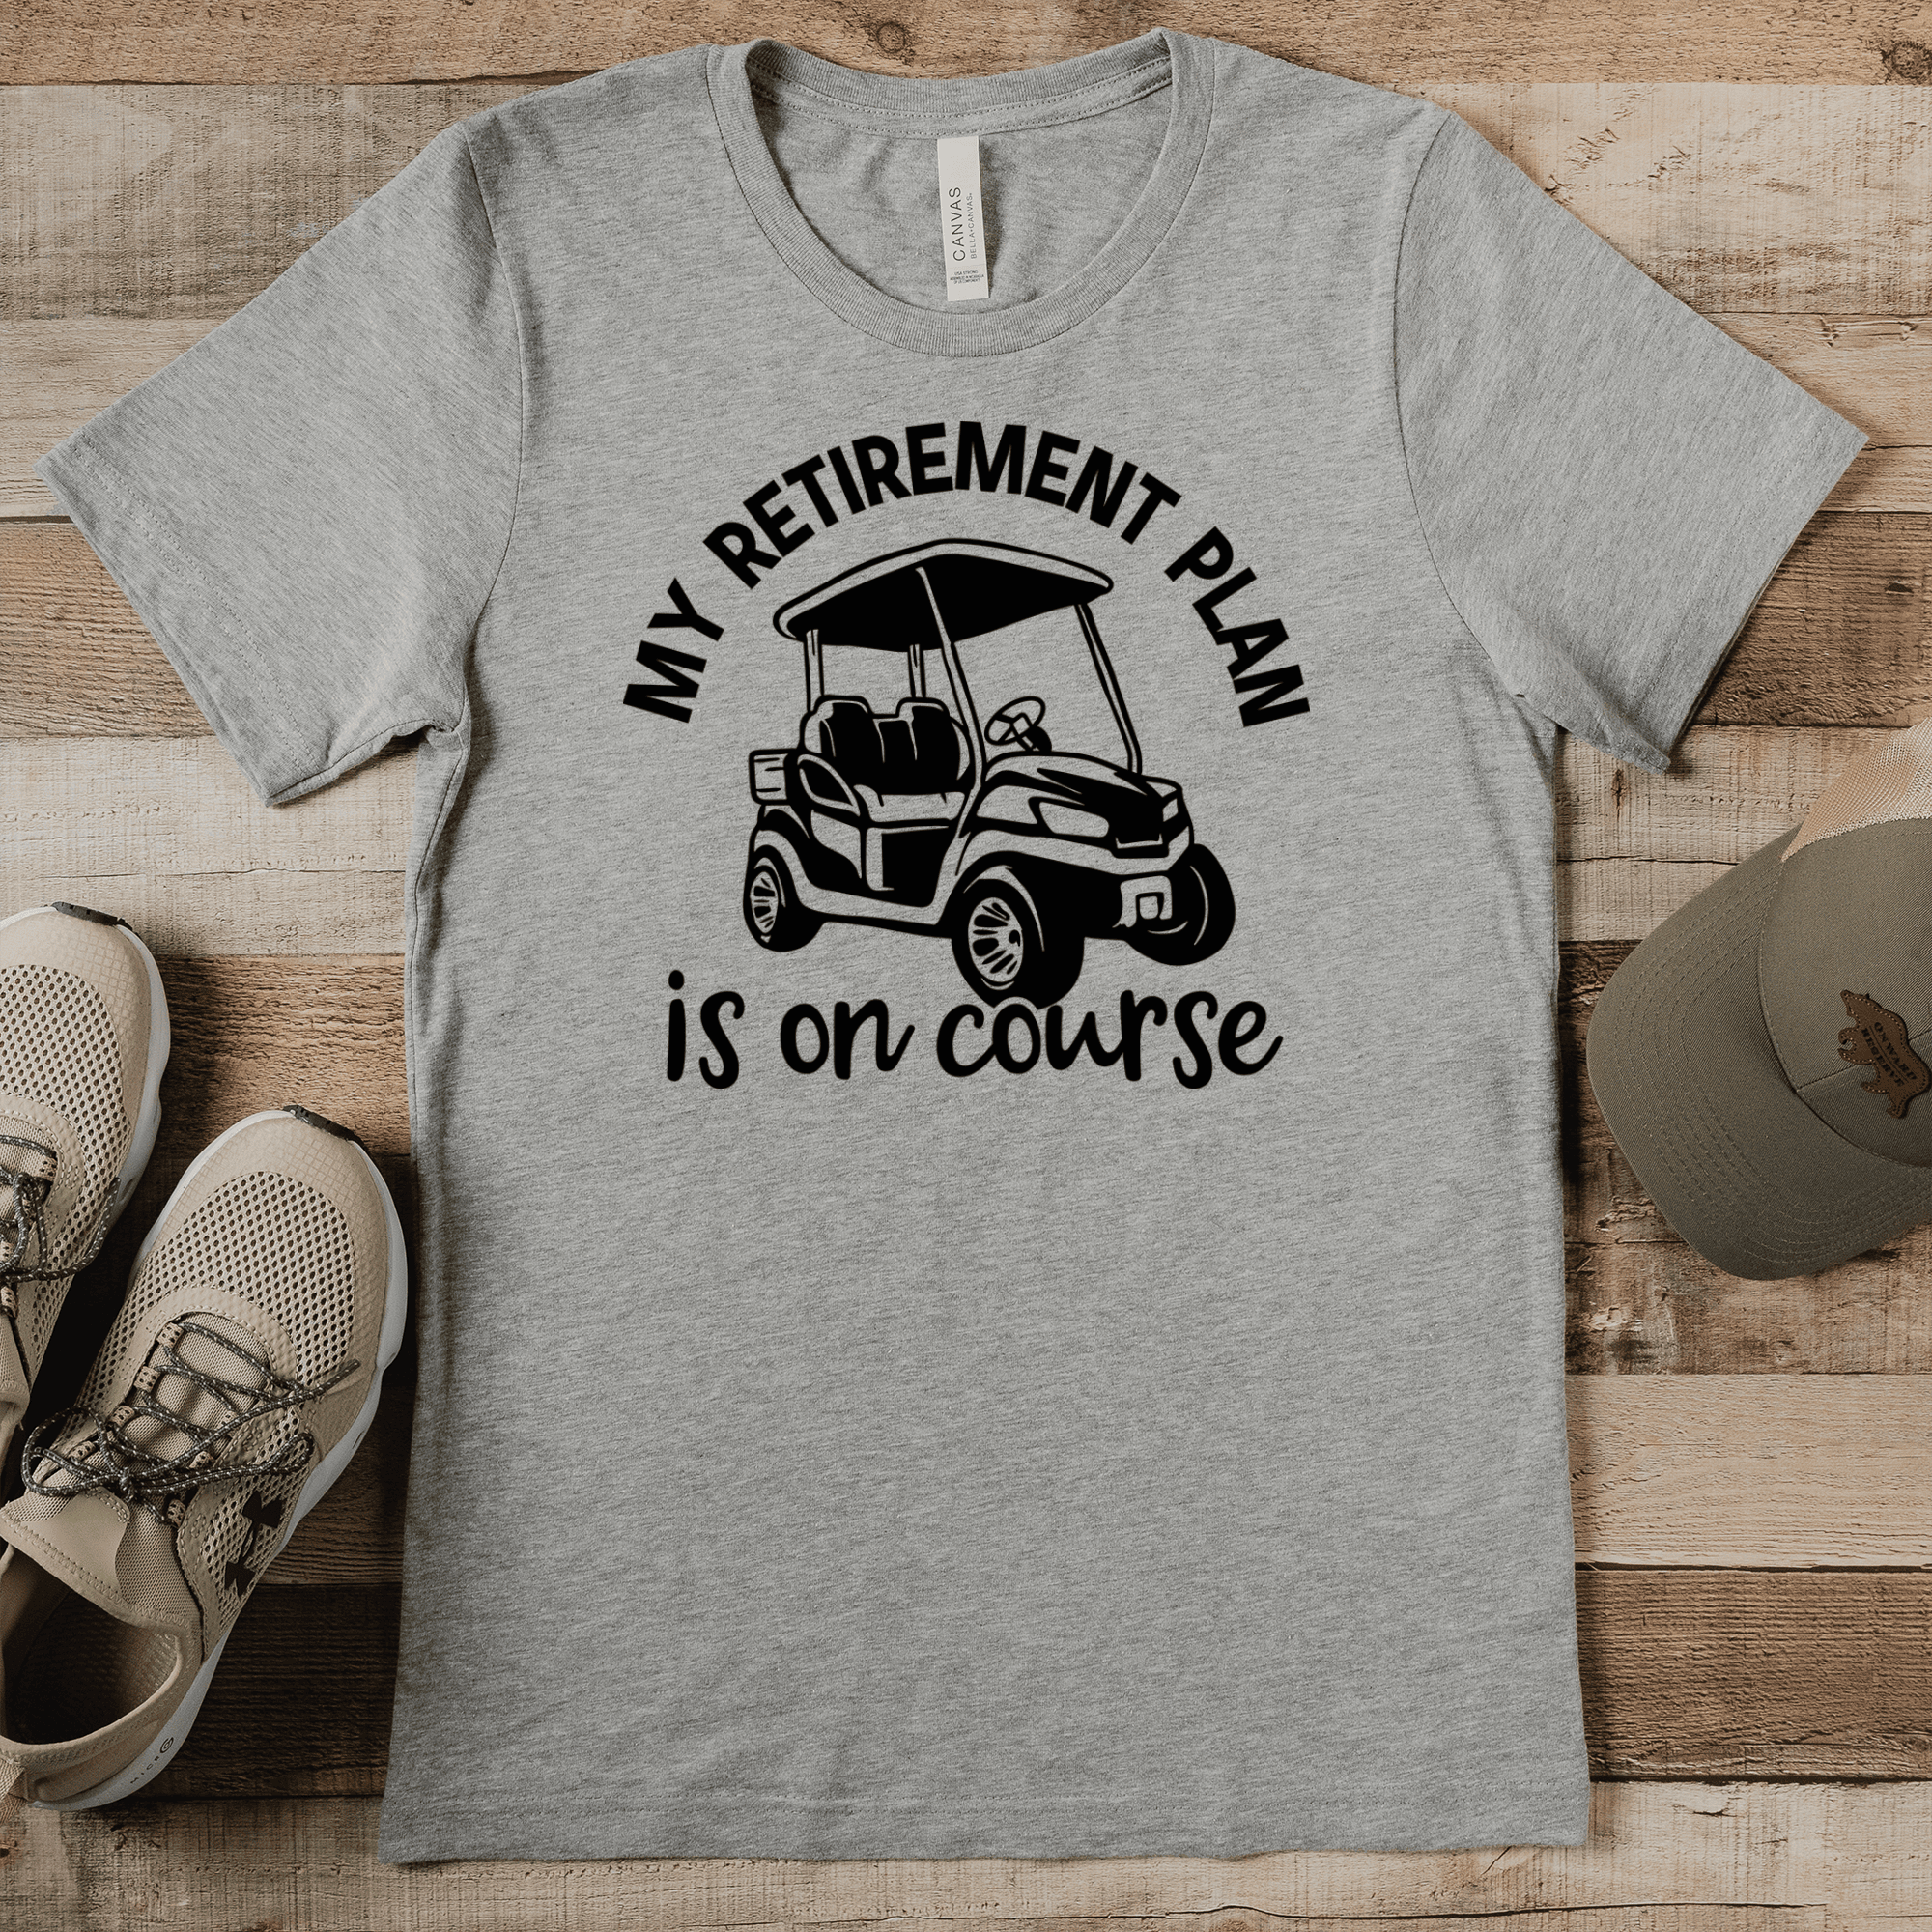 Grey Mens T-Shirt With My Retirement Plan Is On Course Design